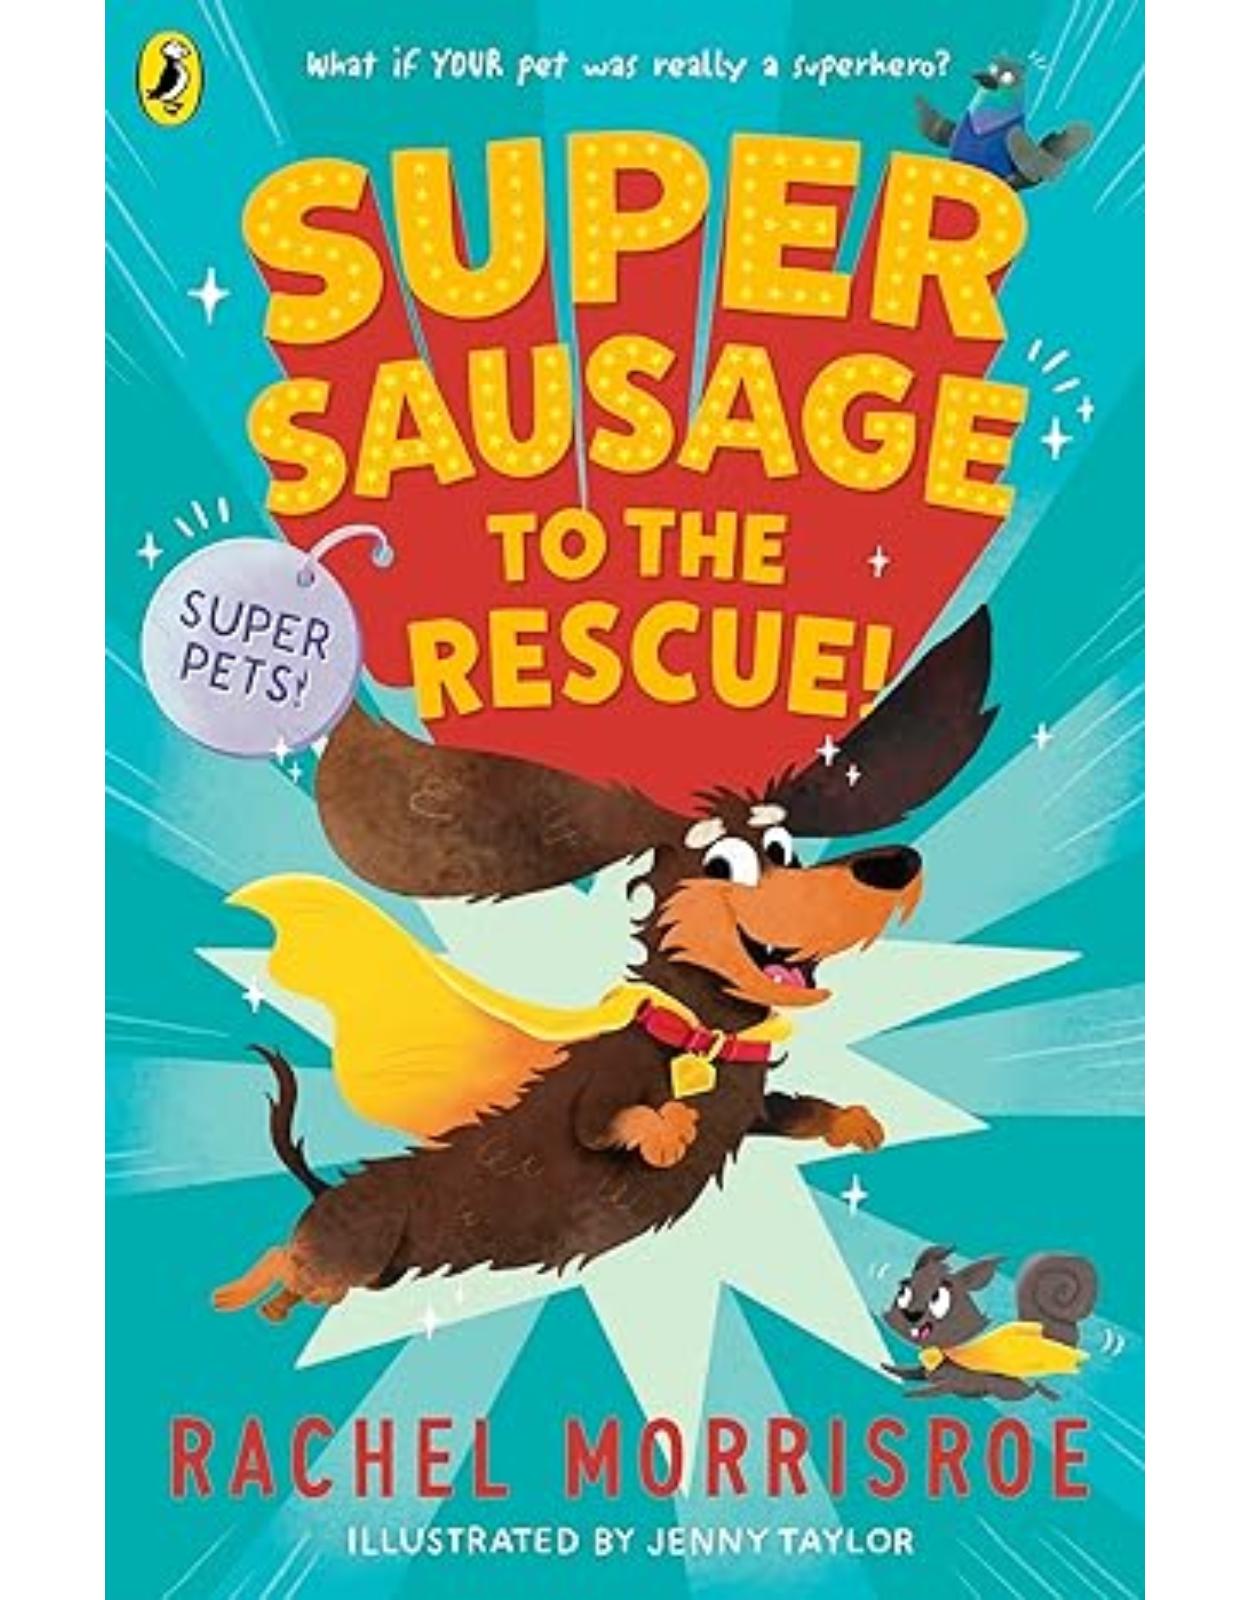 Supersausage to the rescue!